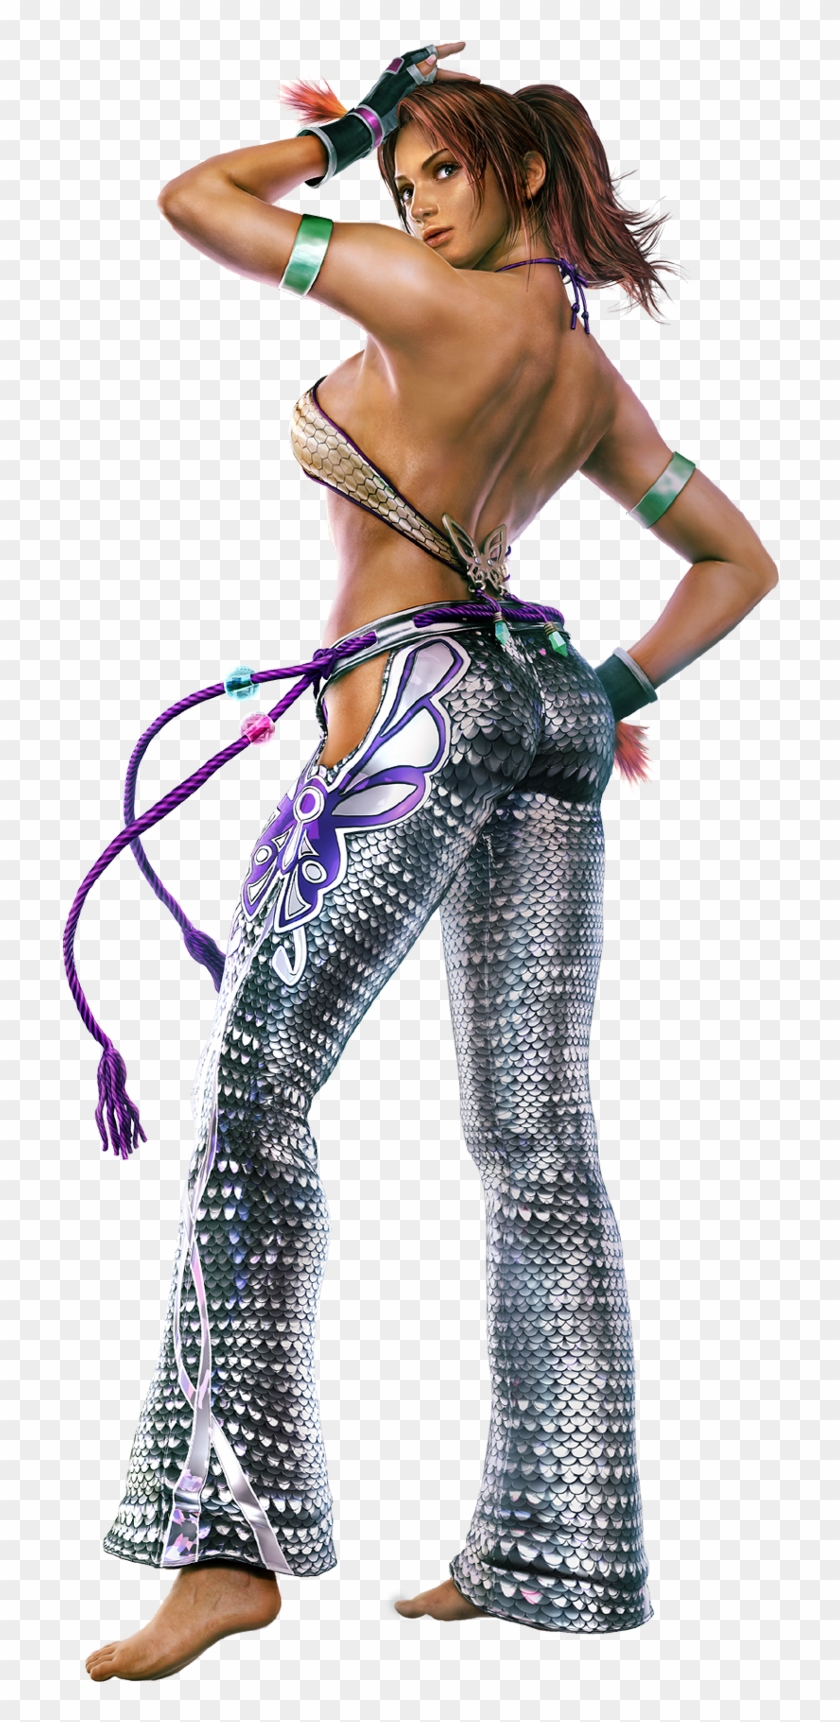 Can You Agree With Me That Christie Is The Hottest - Tekken 6 Christie Monteiro Clipart #5696537